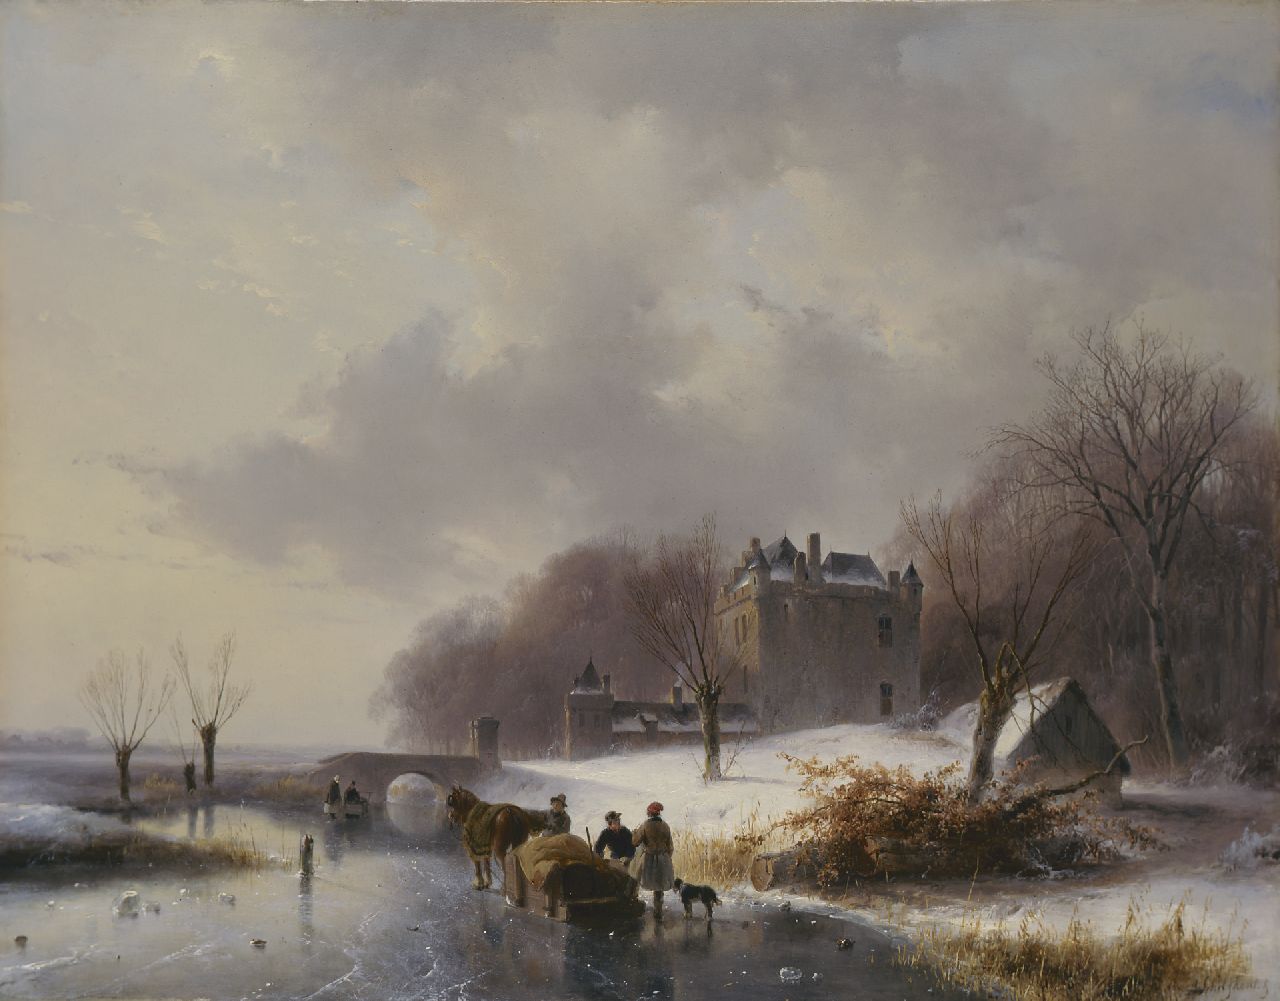 Schelfhout A.  | Andreas Schelfhout, A winter landscape with castle 'Doornenburg'  in the distance, oil on panel 41.6 x 53.9 cm, signed l.r.